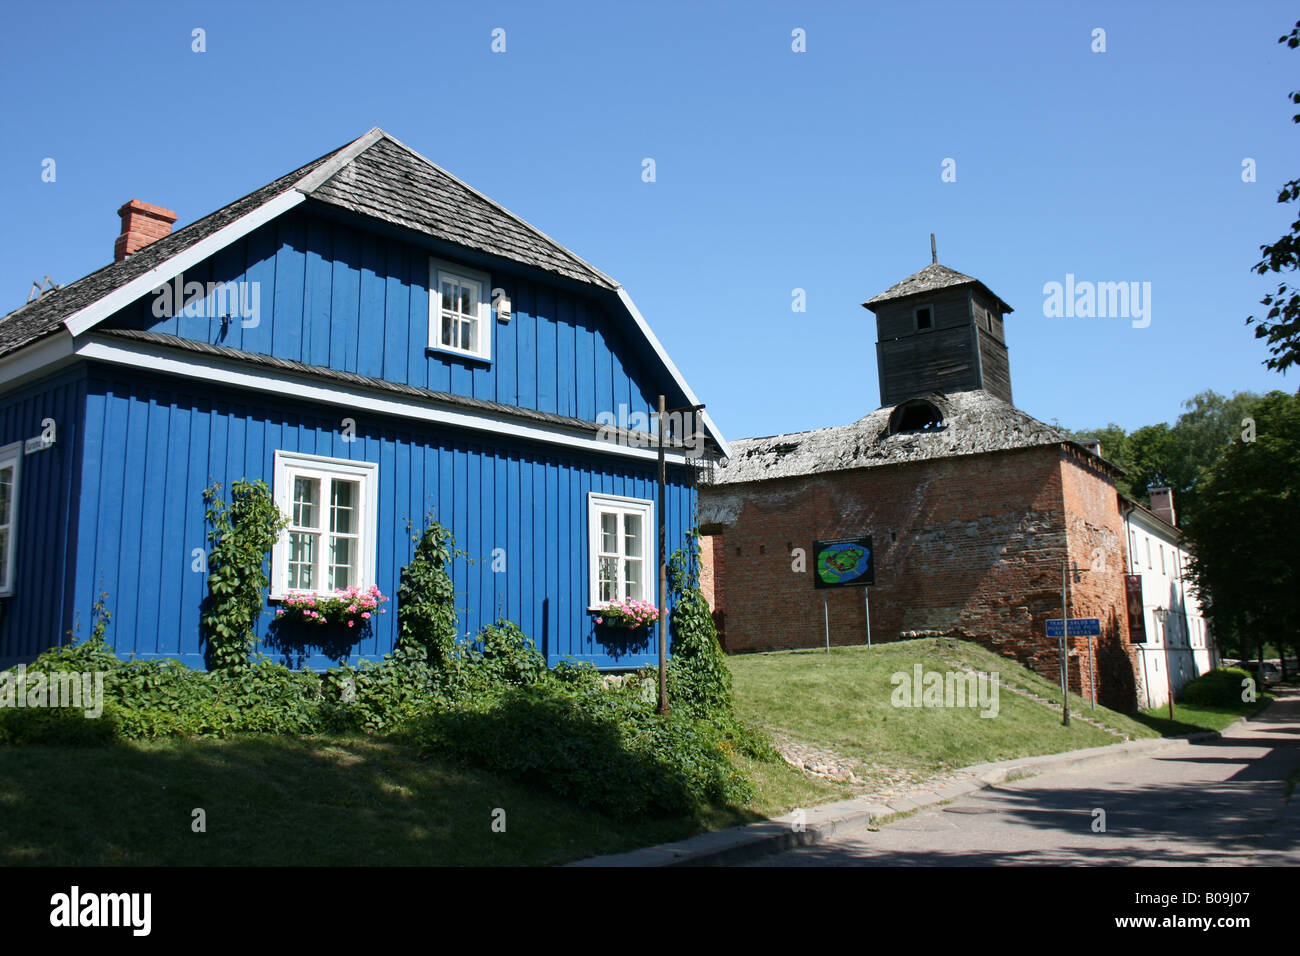 The old post office building and fort in Trakai, Lithuania Stock Photo